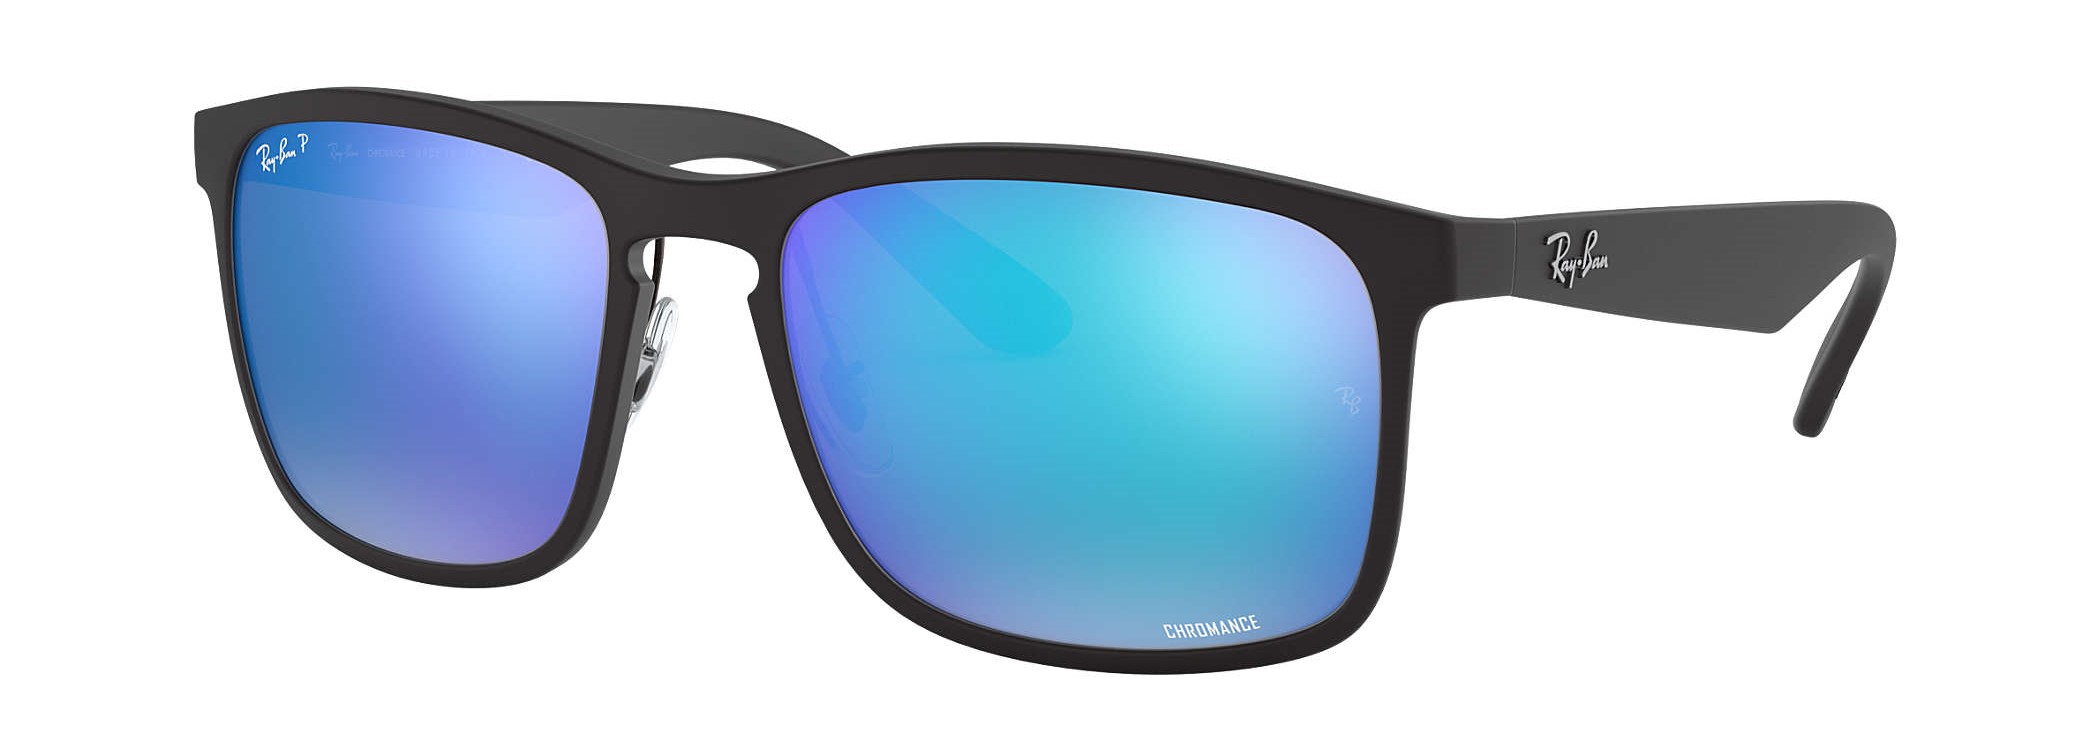 Ray-Ban Gift Guide featuring the RB4264 Chromance sunglasses in matte black with square blue flash lenses